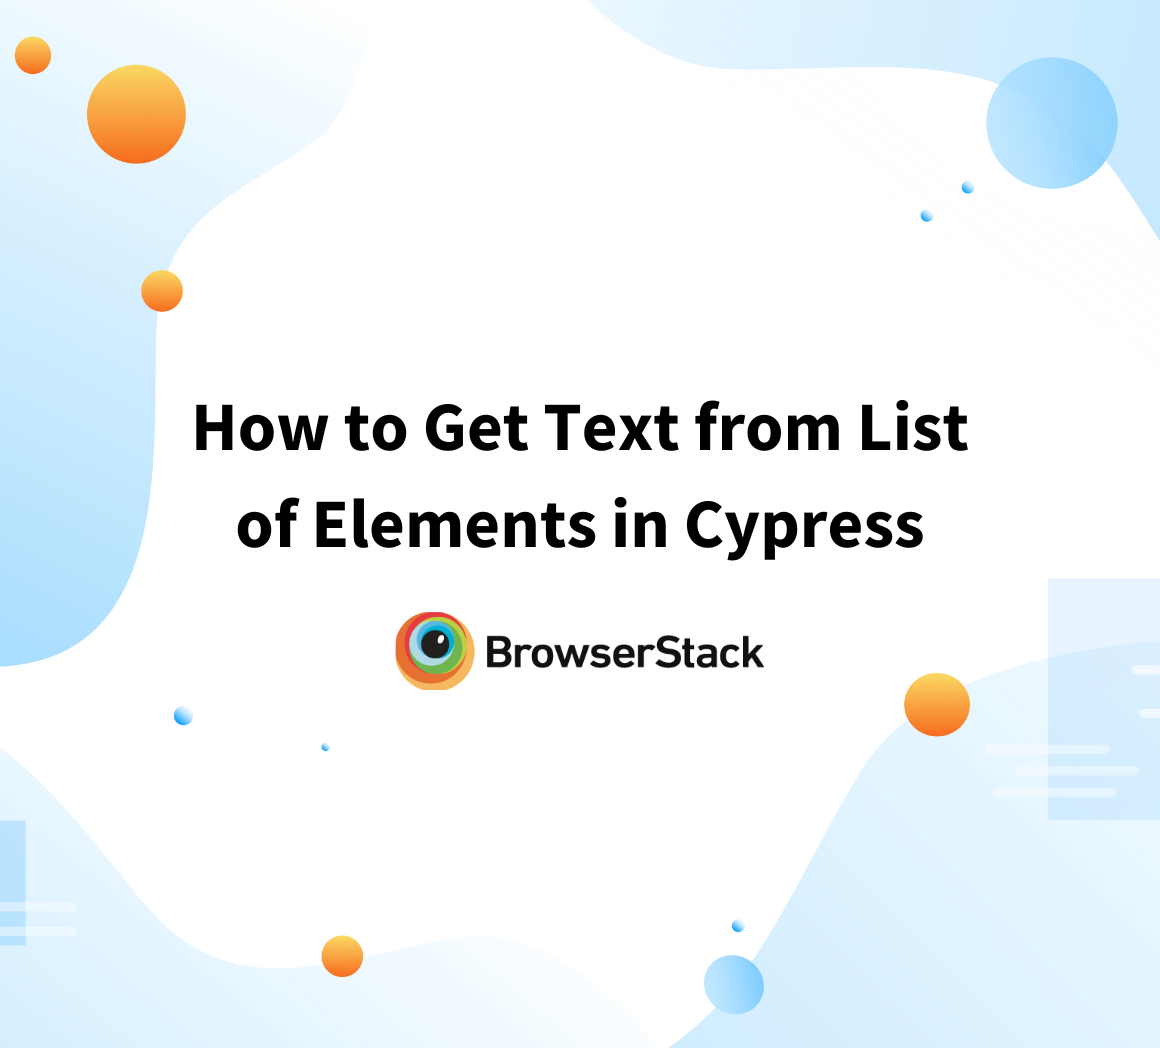 How to Get Text from List of Elements in Cypress